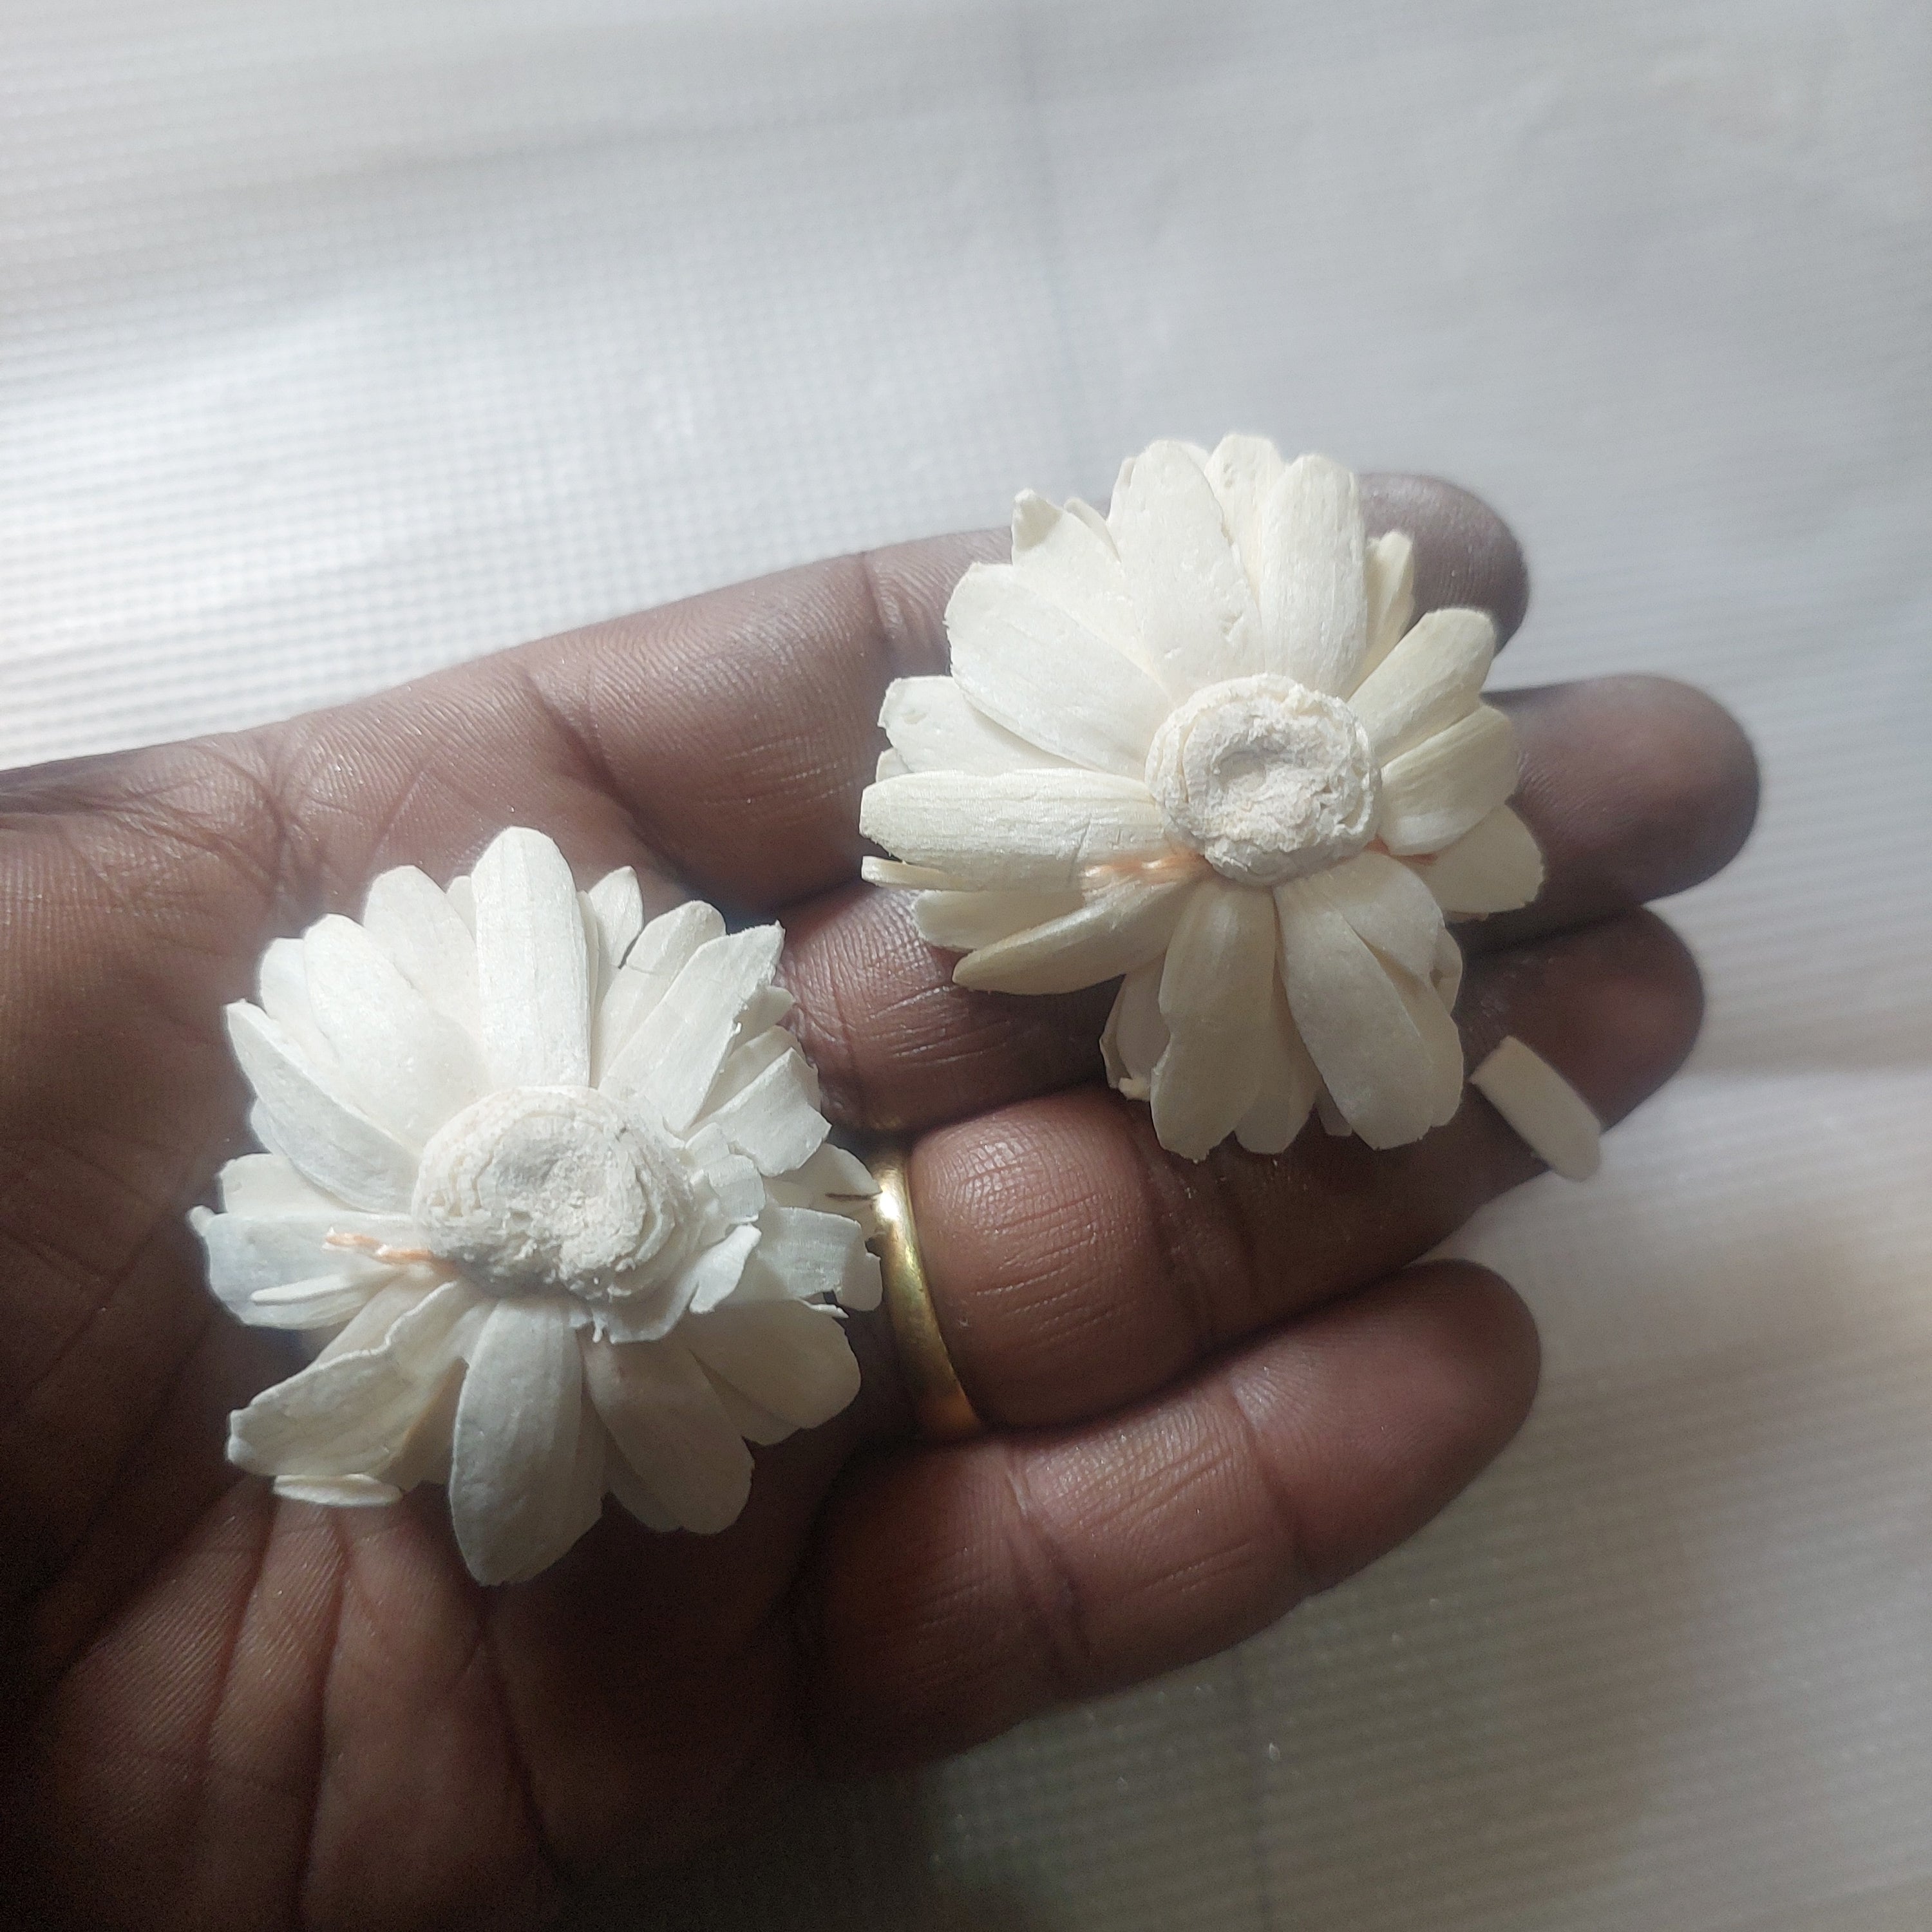 Sola Wood flower-3piece in a pack